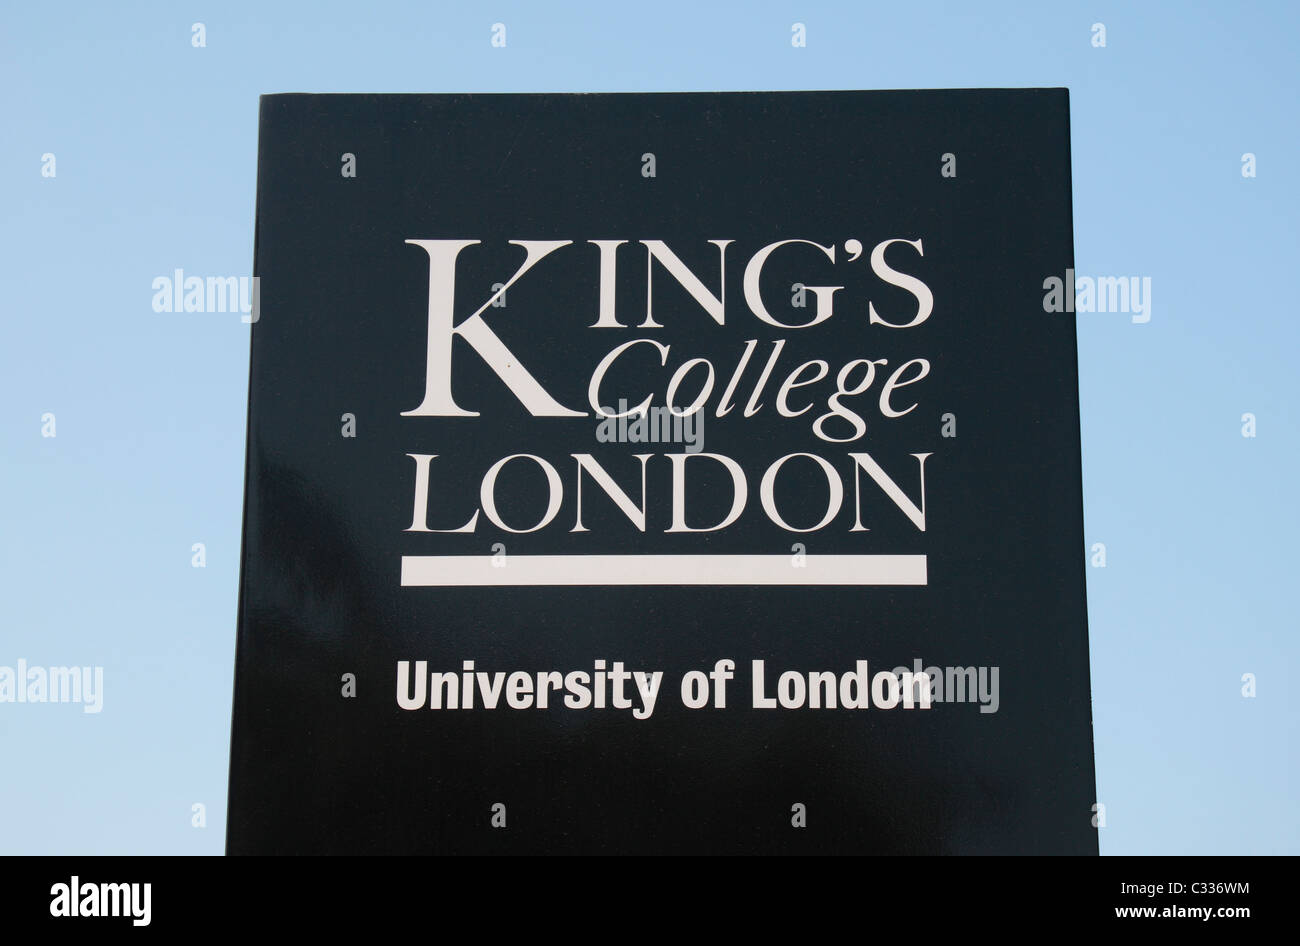 Sign for King's College London, University of London against a light blue sky. Stock Photo